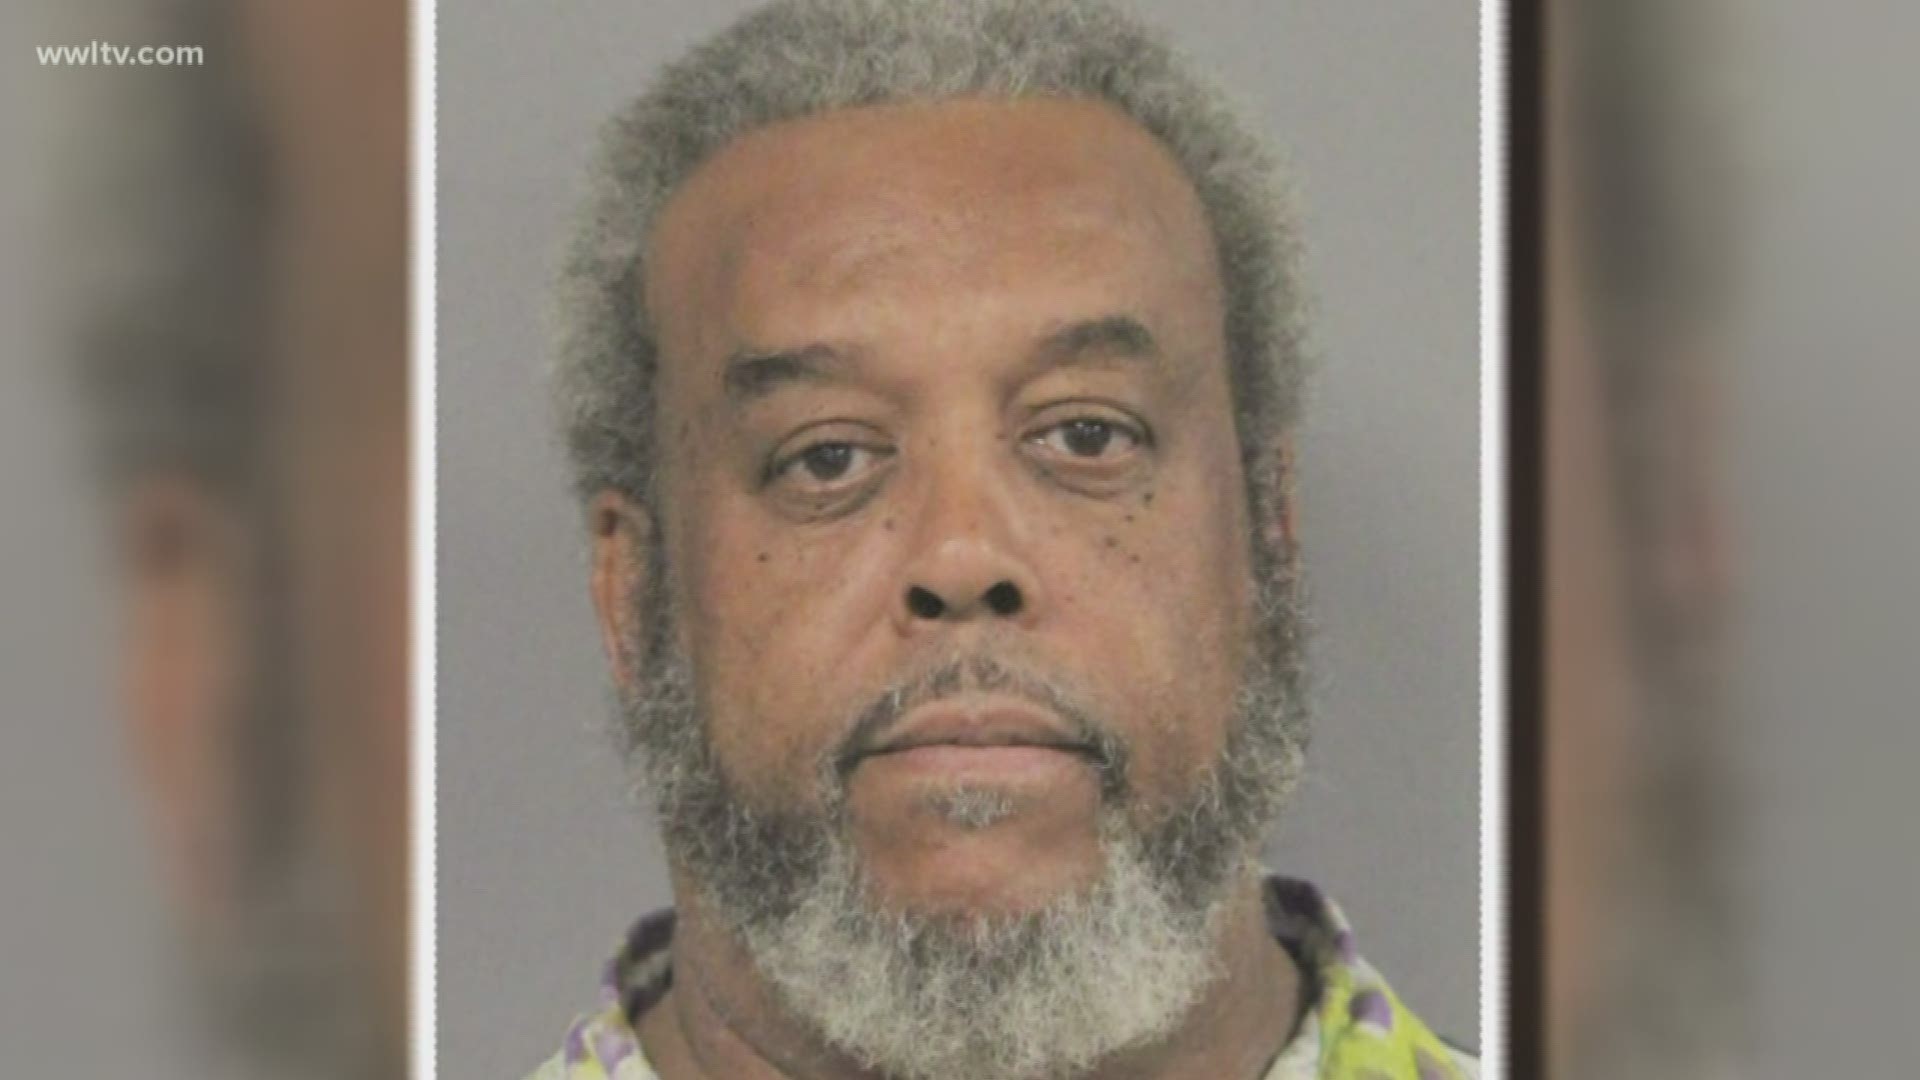 Police say 58-year-old Dudd Ogden targeted and terrified a woman and her 2-year-old god son at 4 a.m. on Reverand Richard Wilson Boulevard.